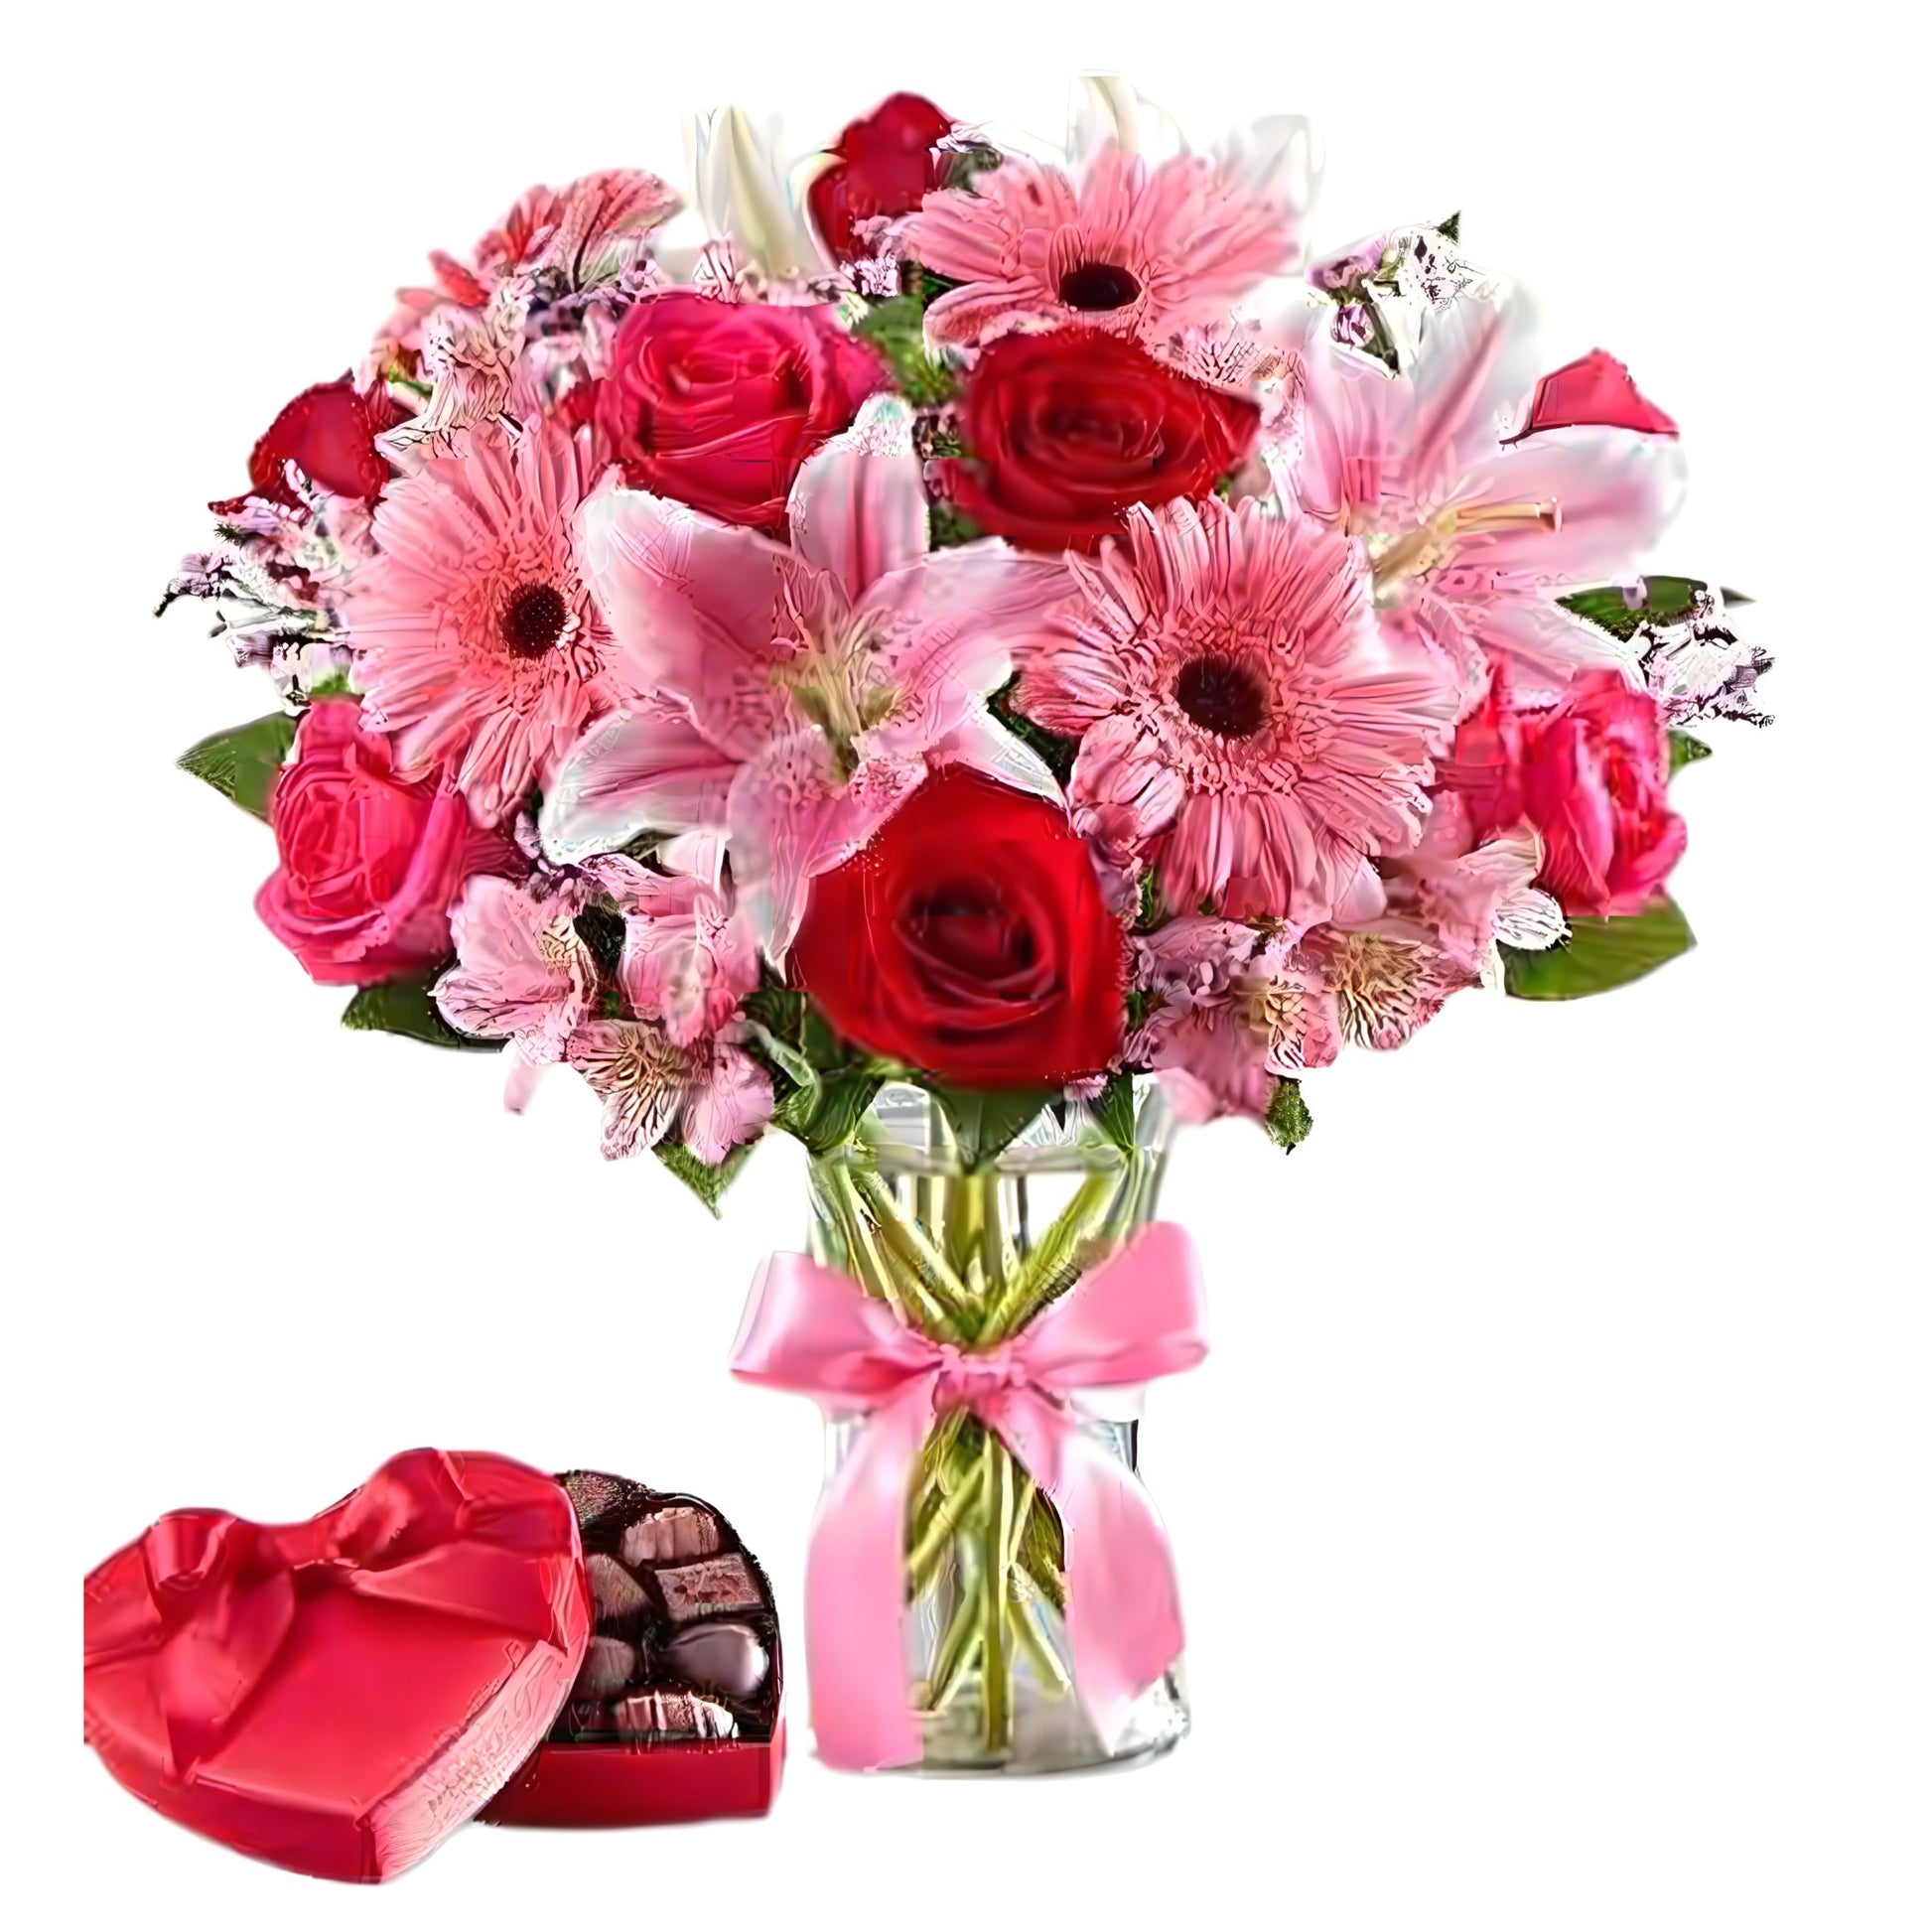 My Valentine Love With Chocolate - Floral_Arrangement - Flower Delivery NYC